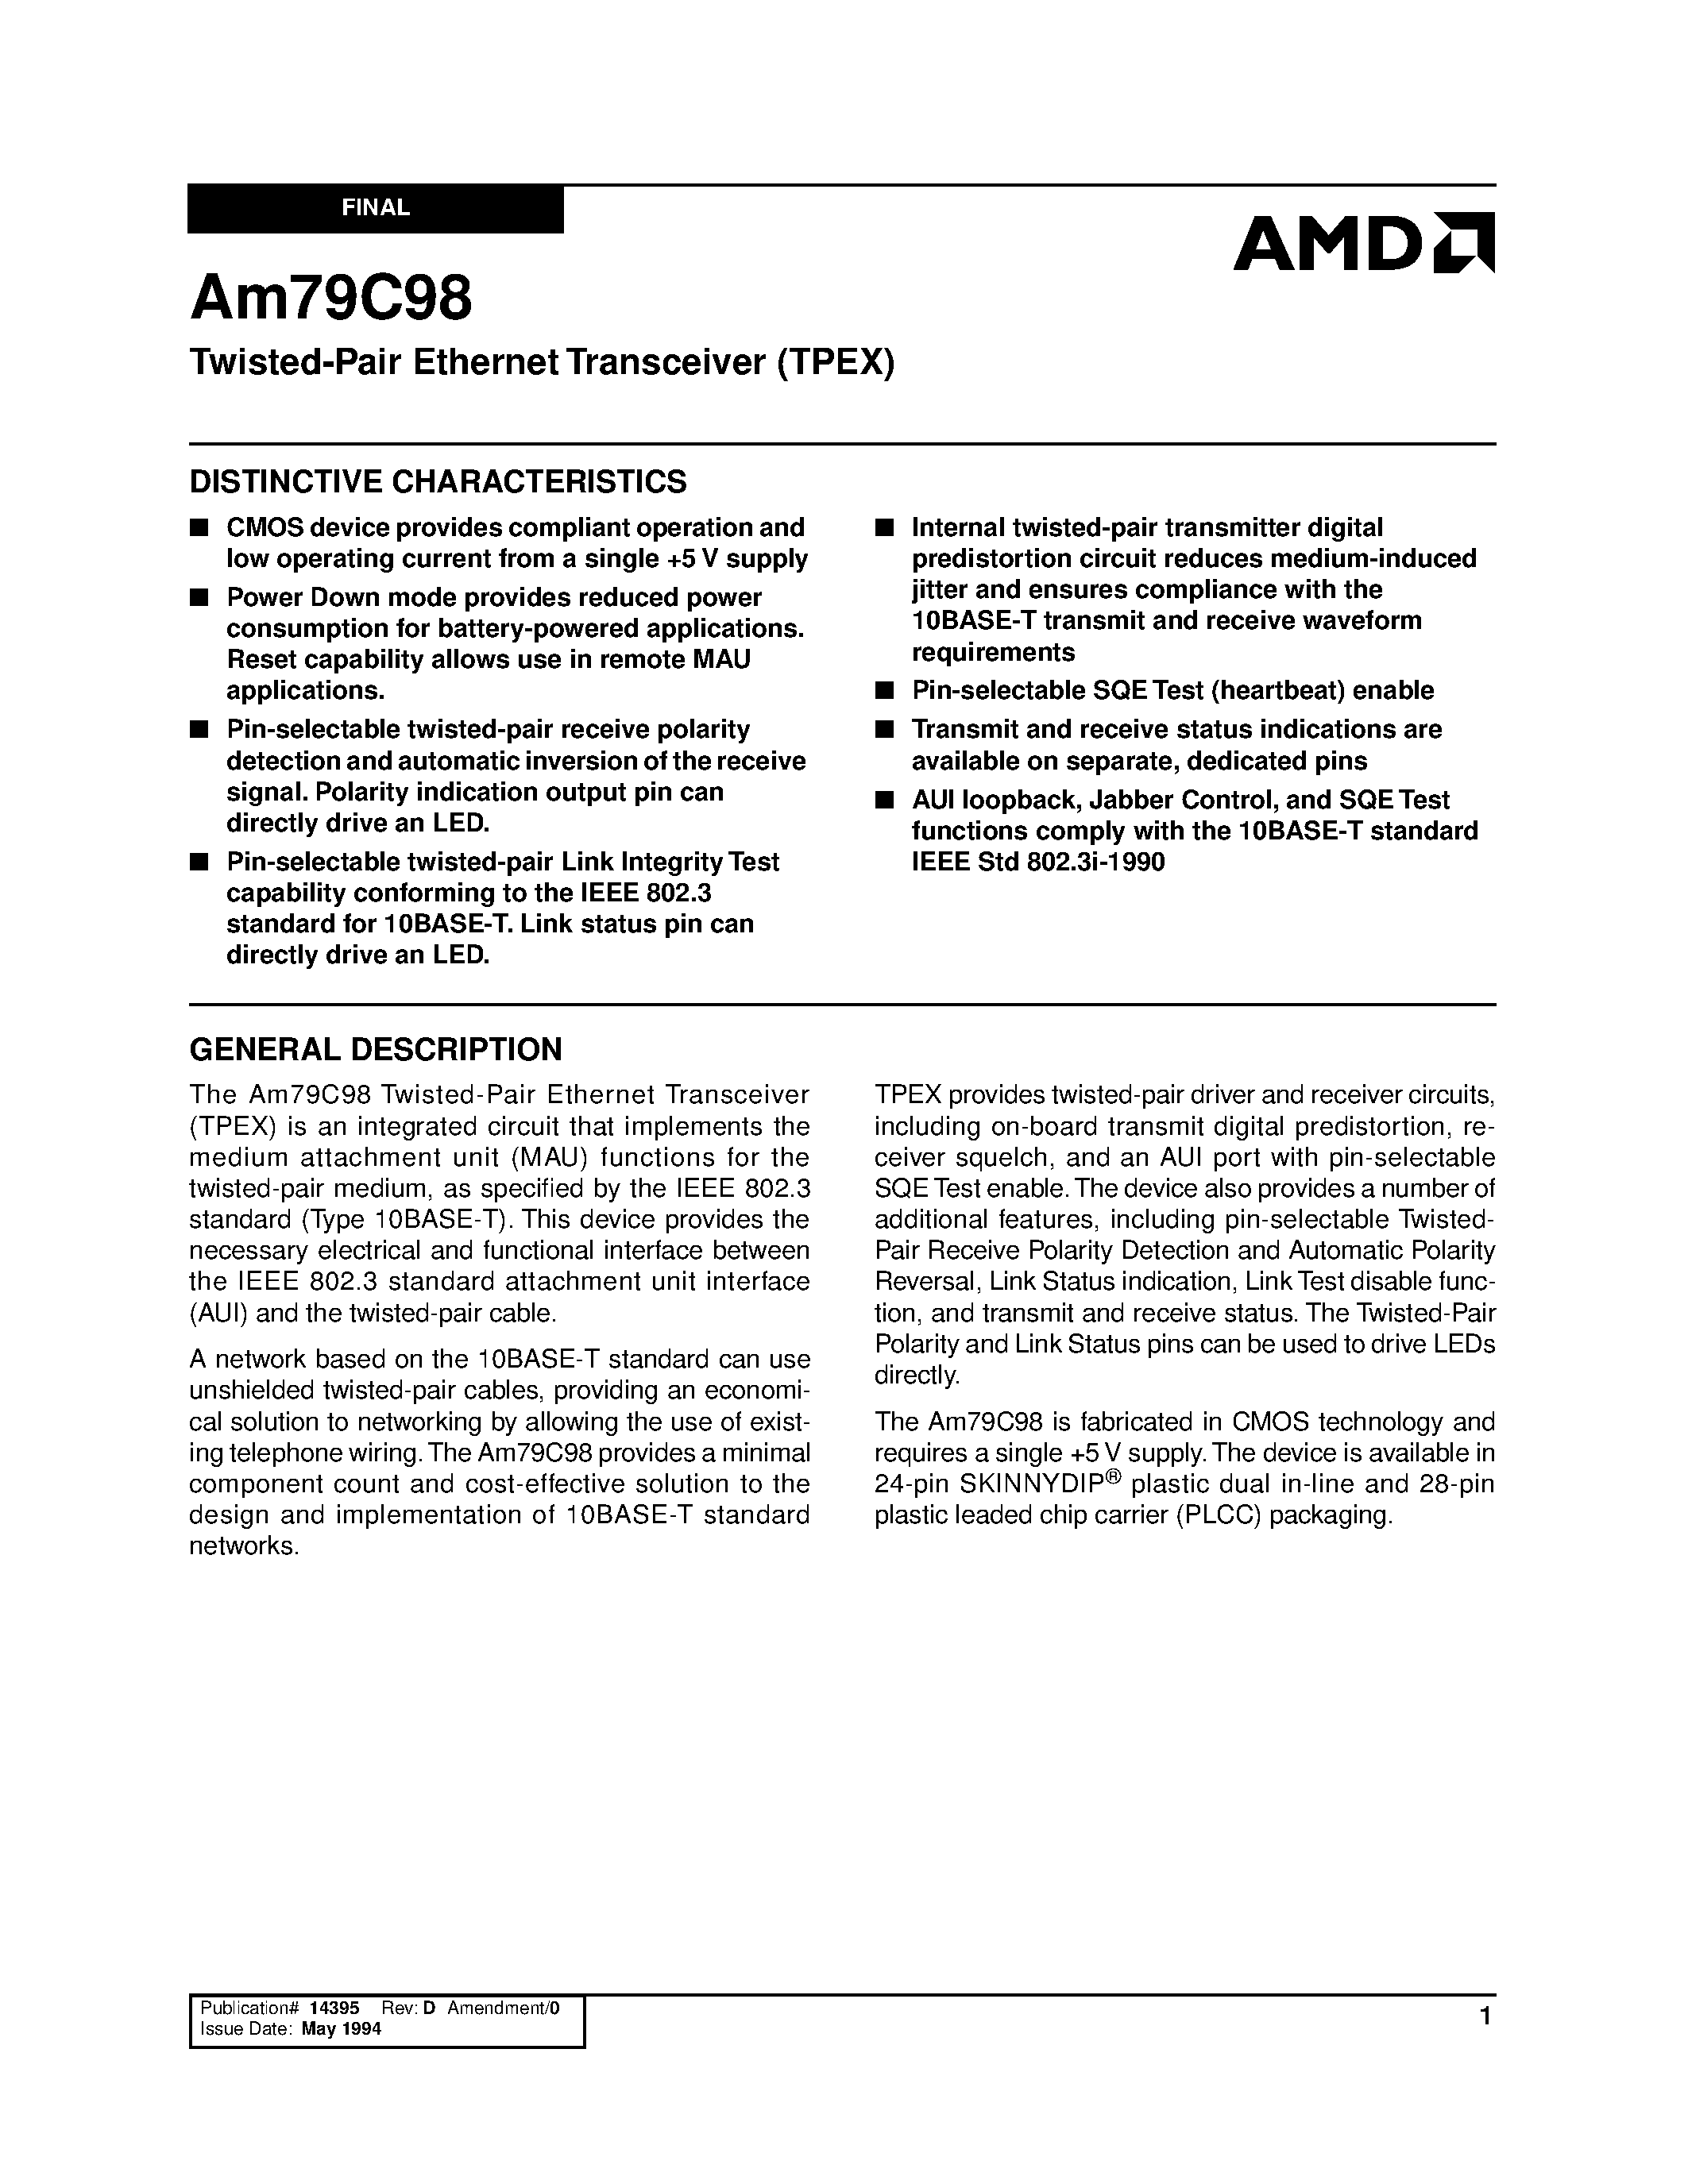 Datasheet AM79C98JC - Twisted-Pair Ethernet Transceiver (TPEX) page 1